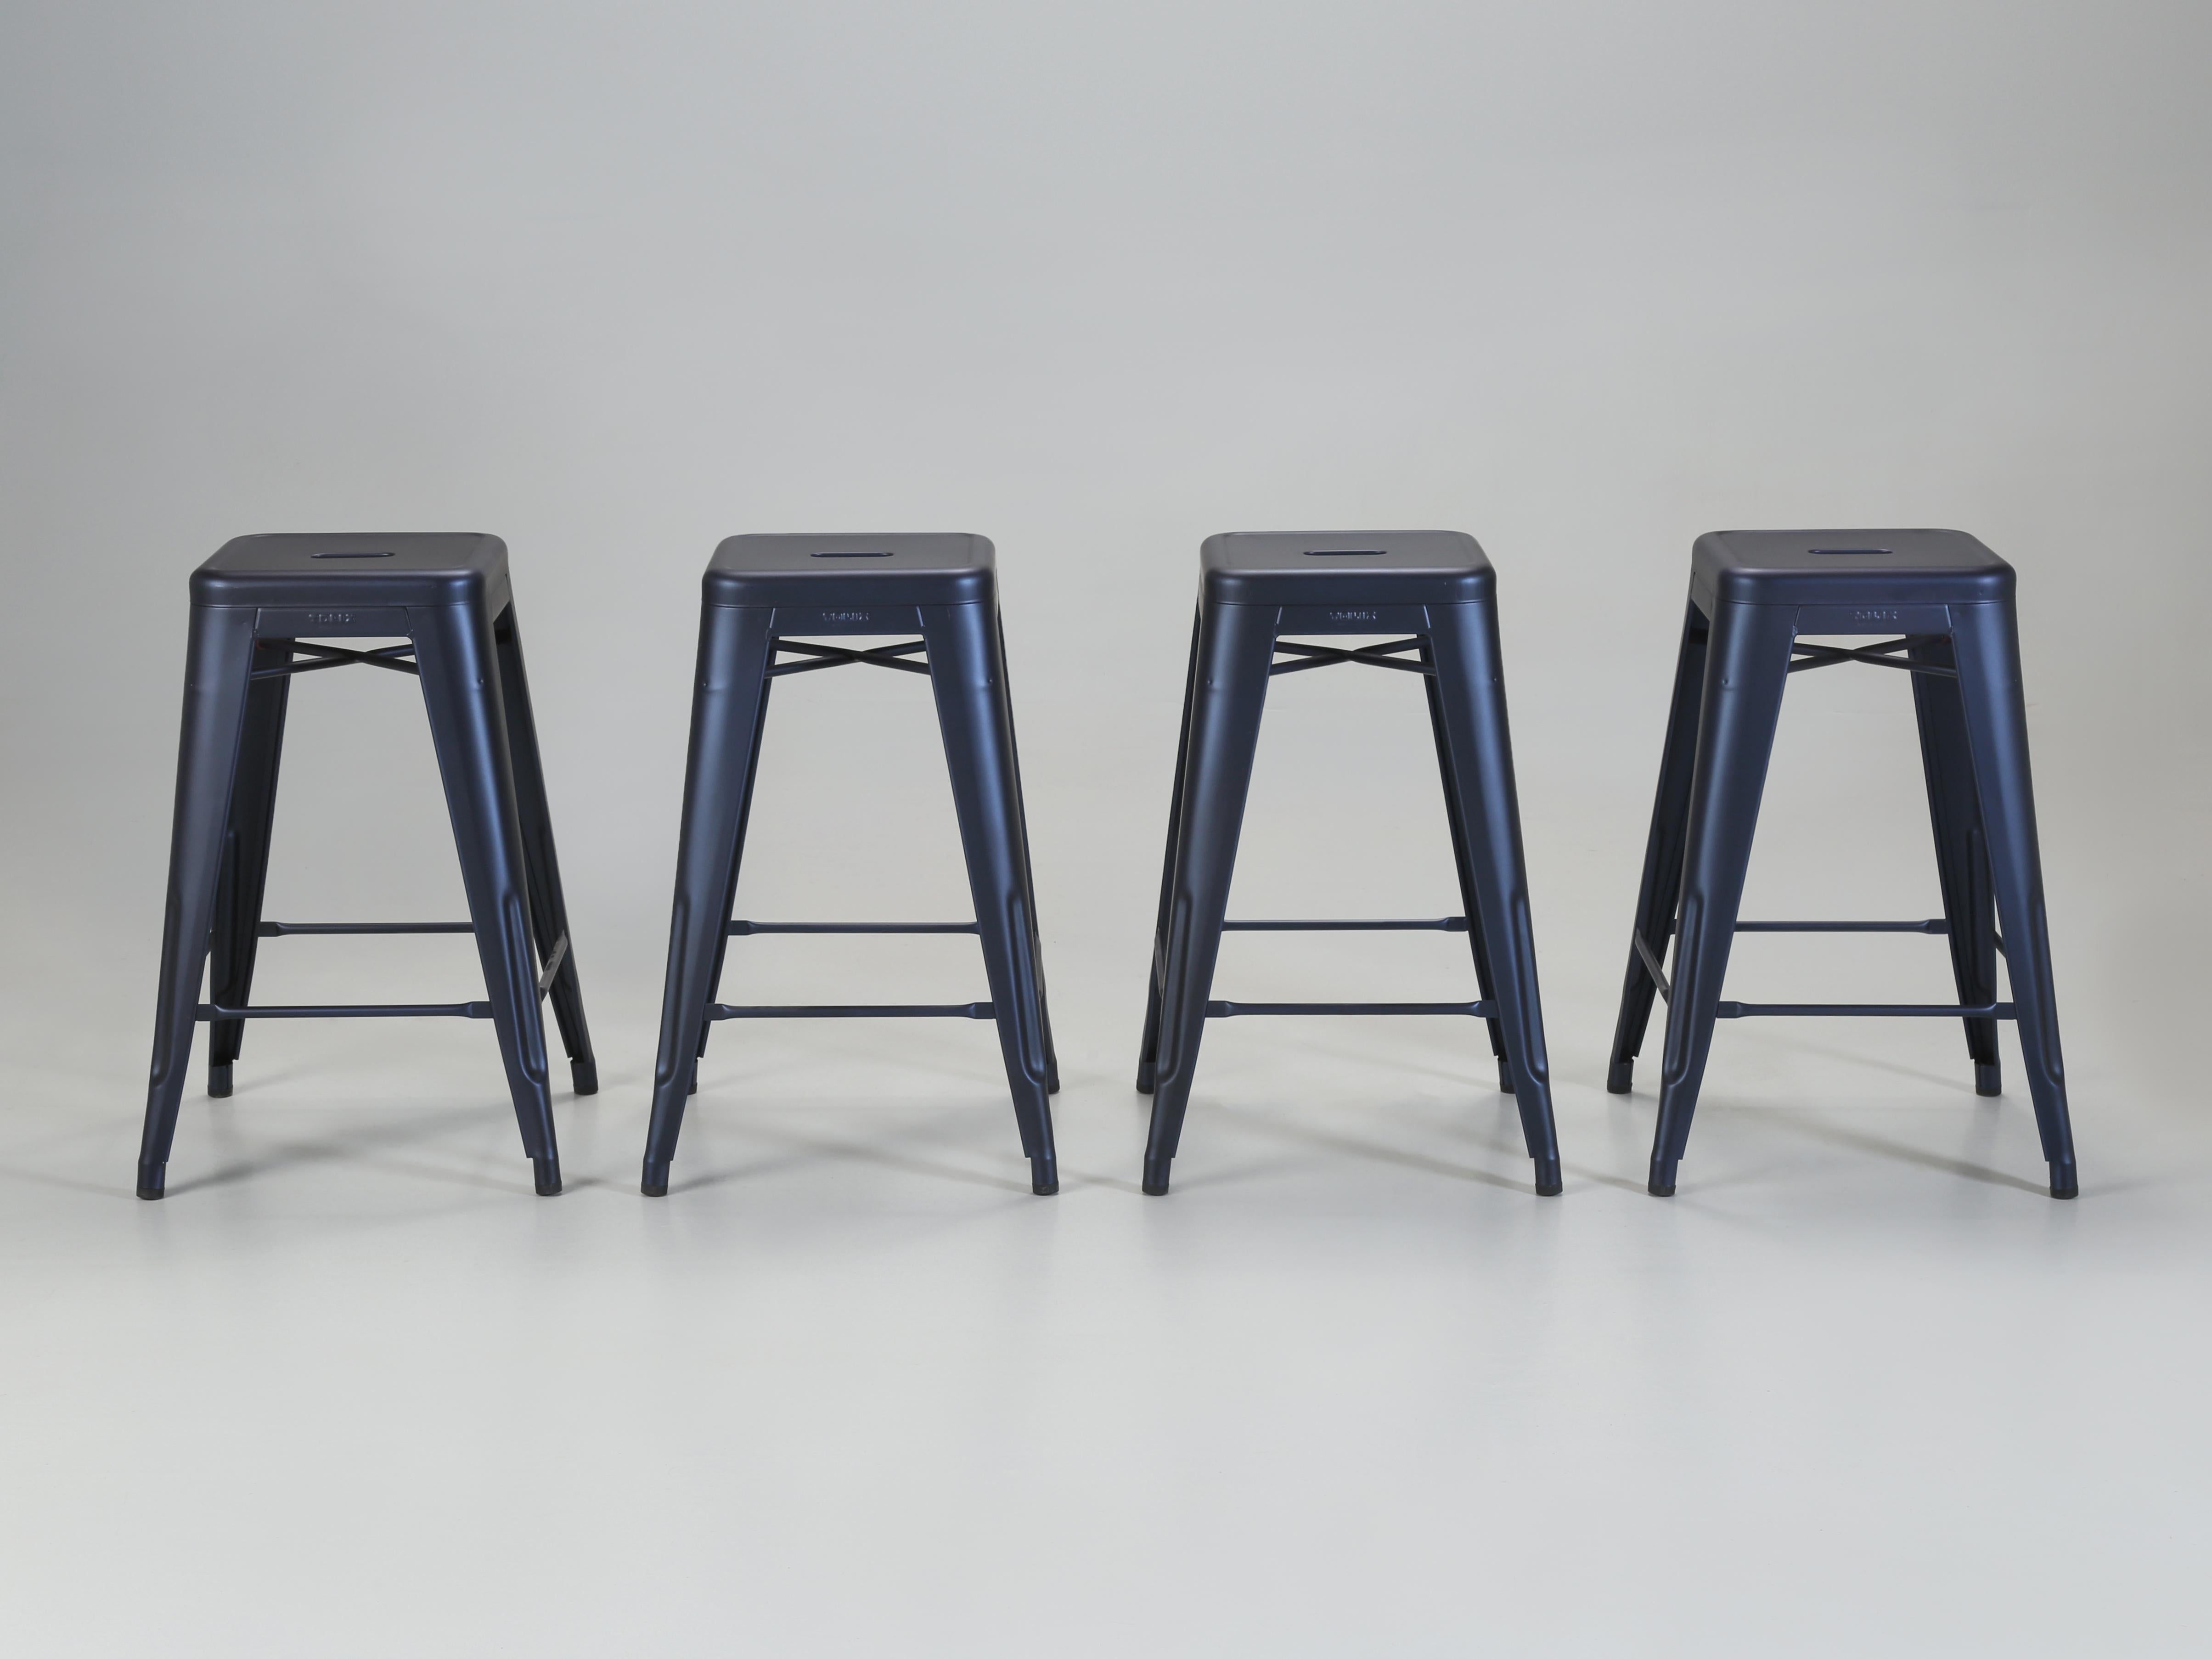 French Hand-Made Set of (4) Genuine Tolix Kitchen Counter Height Stools. We have over (1300) pieces of French Hand-Made Tolix dining chairs and Kitchen Stools, as well as Bar Height and Dining Table Height Tolix Stools in Stock. Please let us know